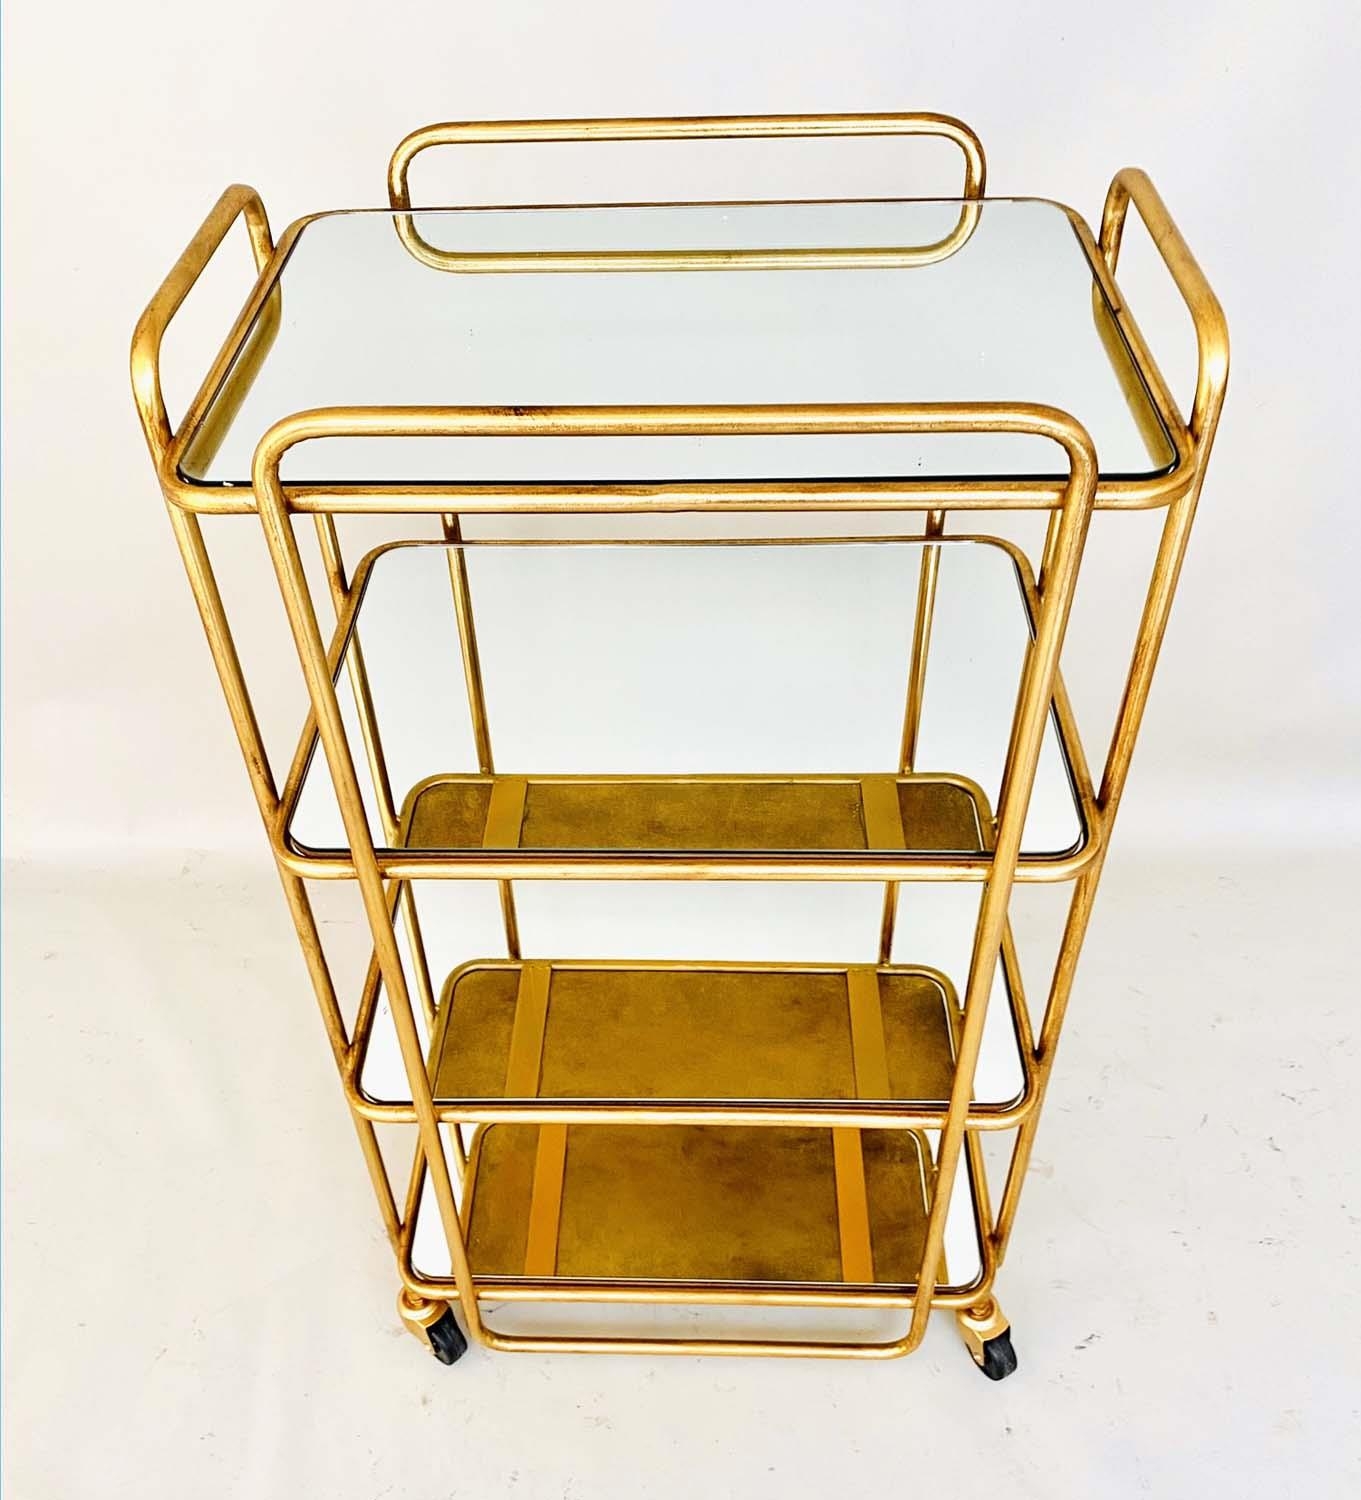 COCKTAIL BAR TROLLEY, 90cm H x 52cm W x 38cm D, 1970s Italian style, gilt metal and mirror. (2) - Image 2 of 5